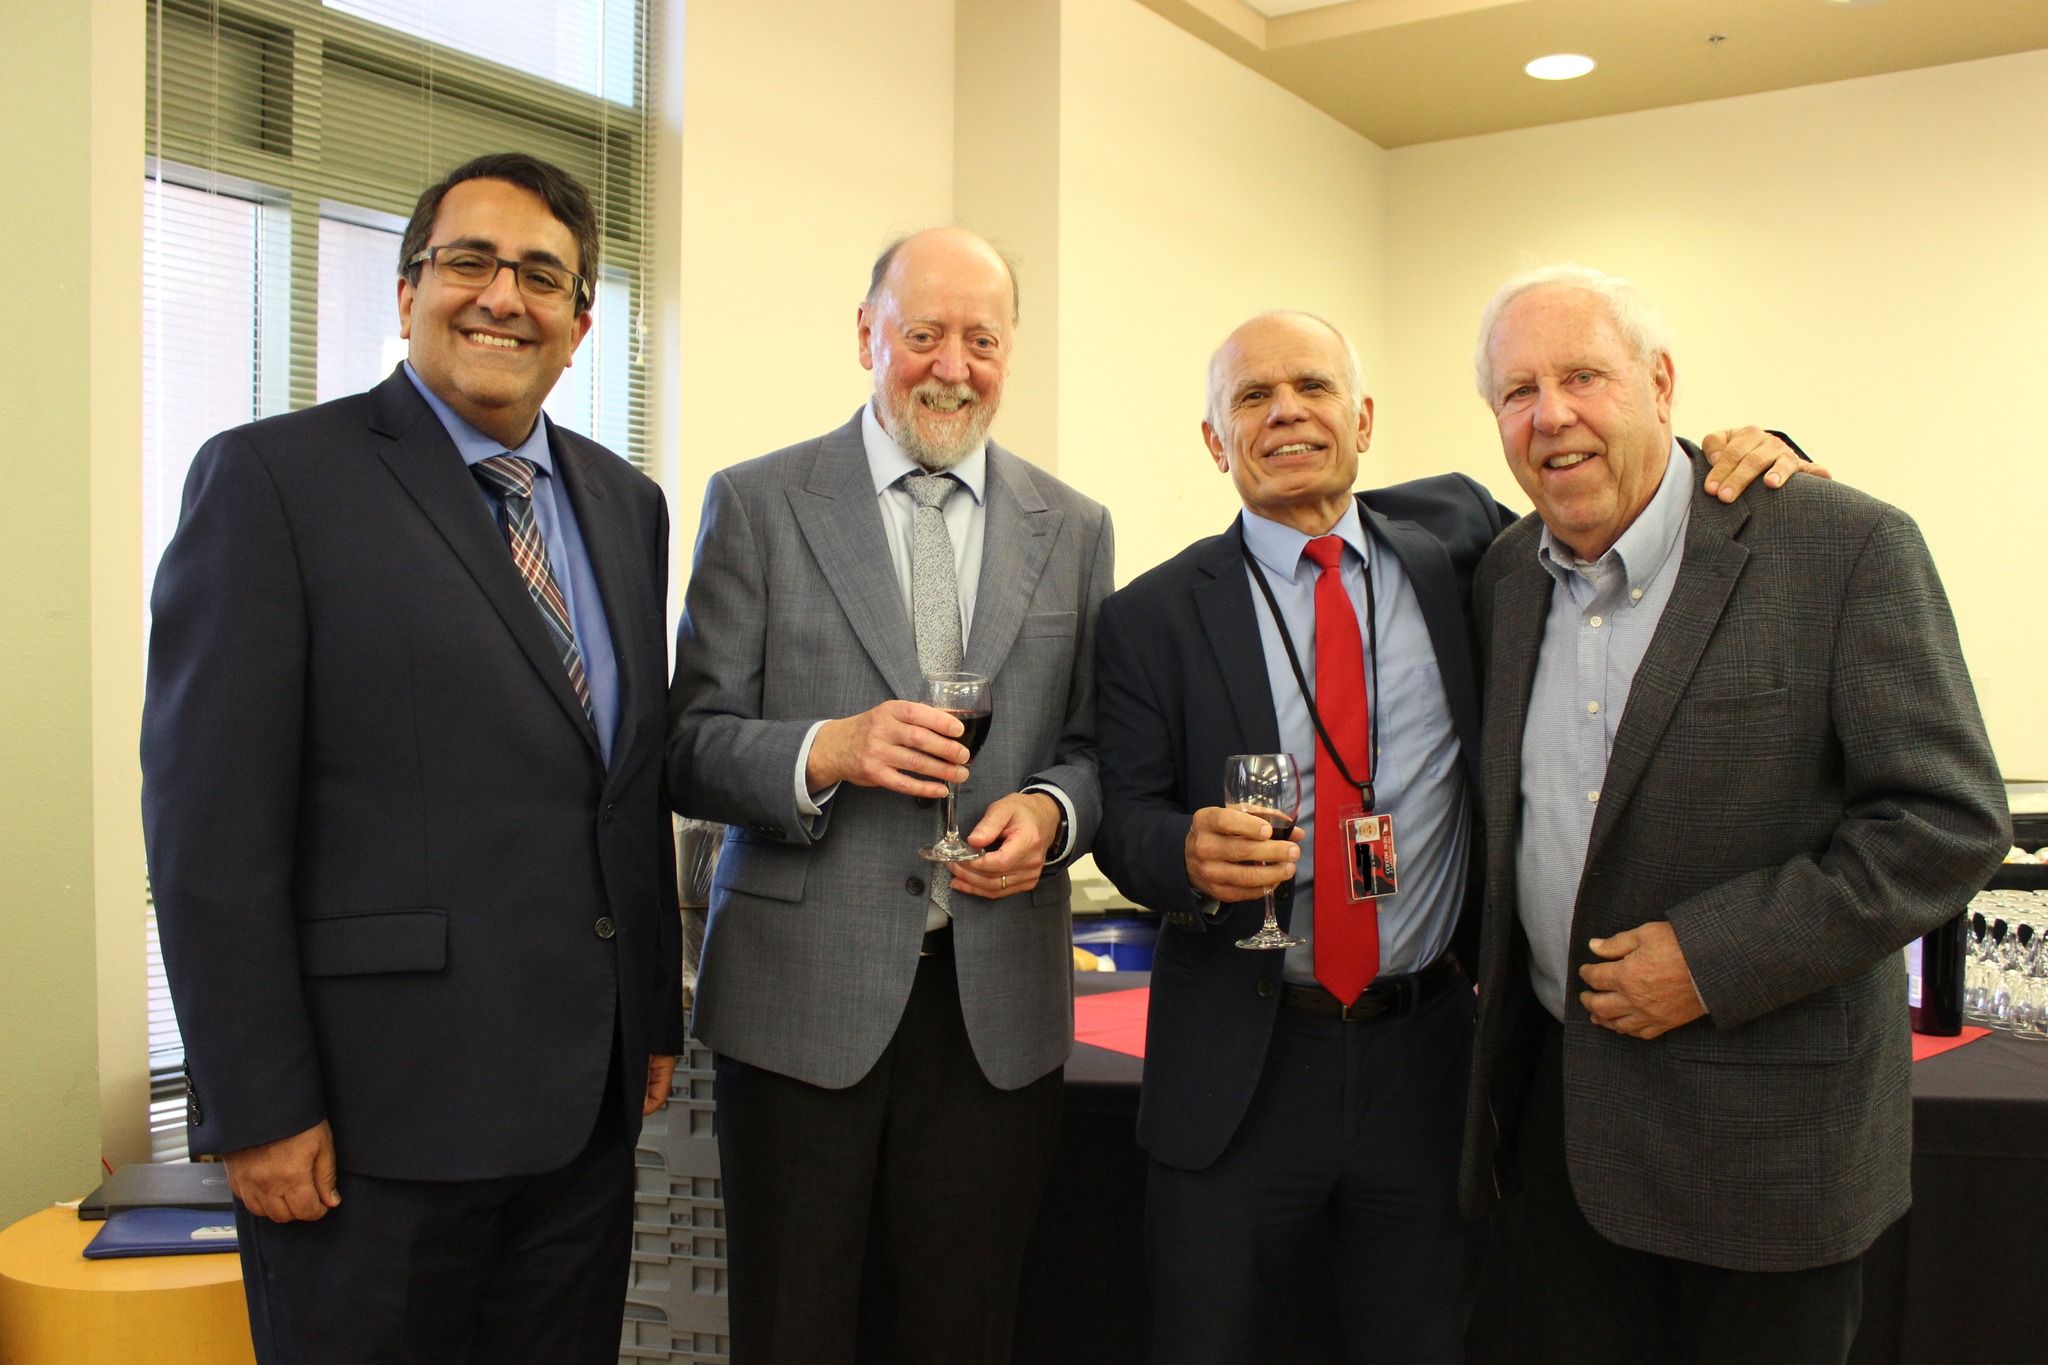 photo: Christodoulou with (left to right) Arash Mafi, interim dean of the College of Arts and Sciences; Turing Award winner and UNM alumnus Jack Dongarra; and Frank Gilfeather, emeritus professor from the Department of Mathematics and Statistics, in October 2022 during the UNM Jack Dongarra celebration at Centennial Engineering Center.